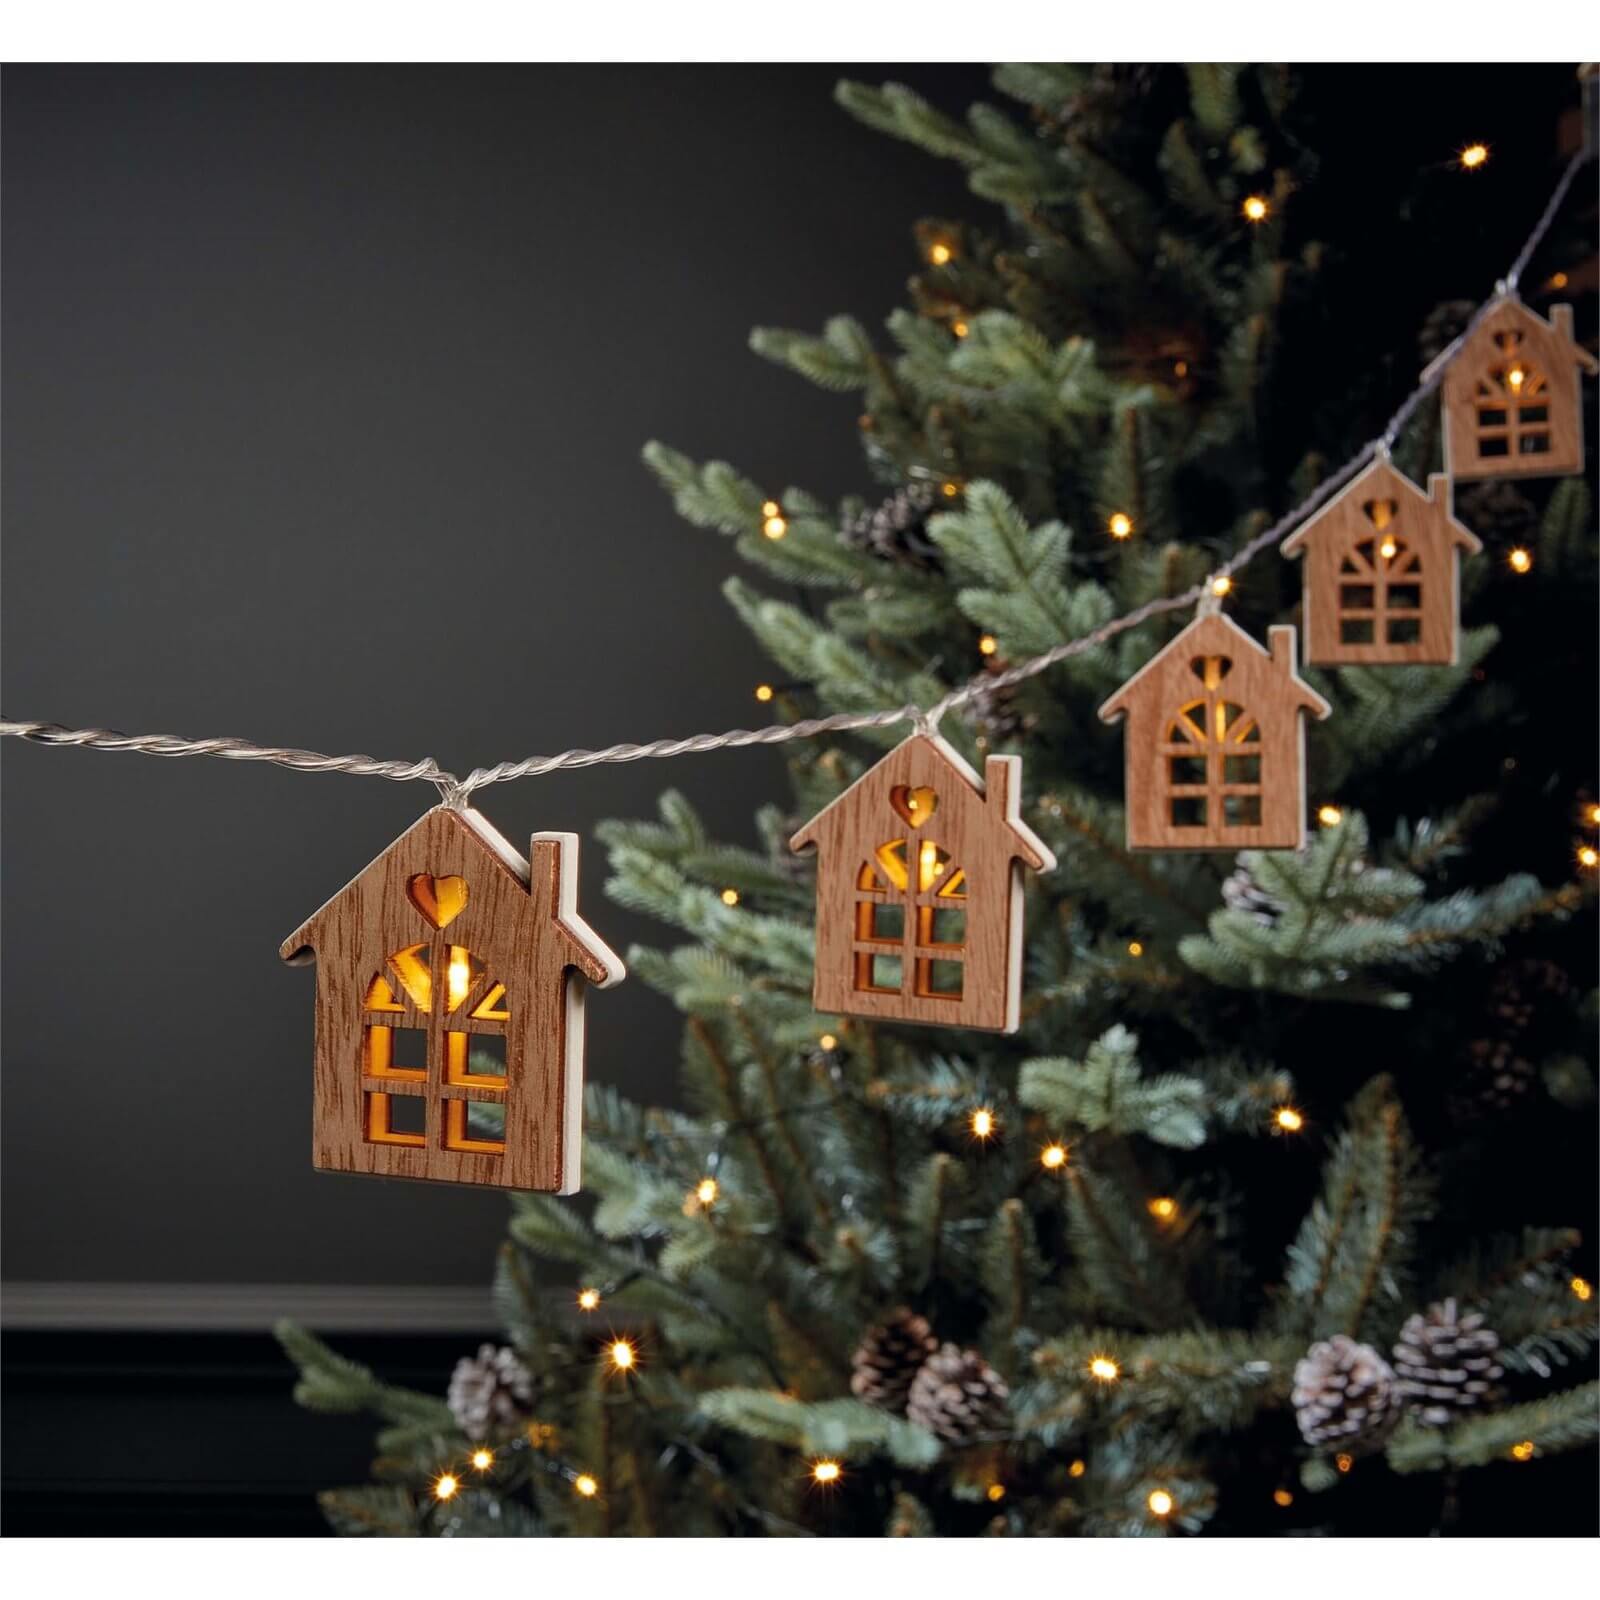 10 Wooden House String Lights (Battery Operated)